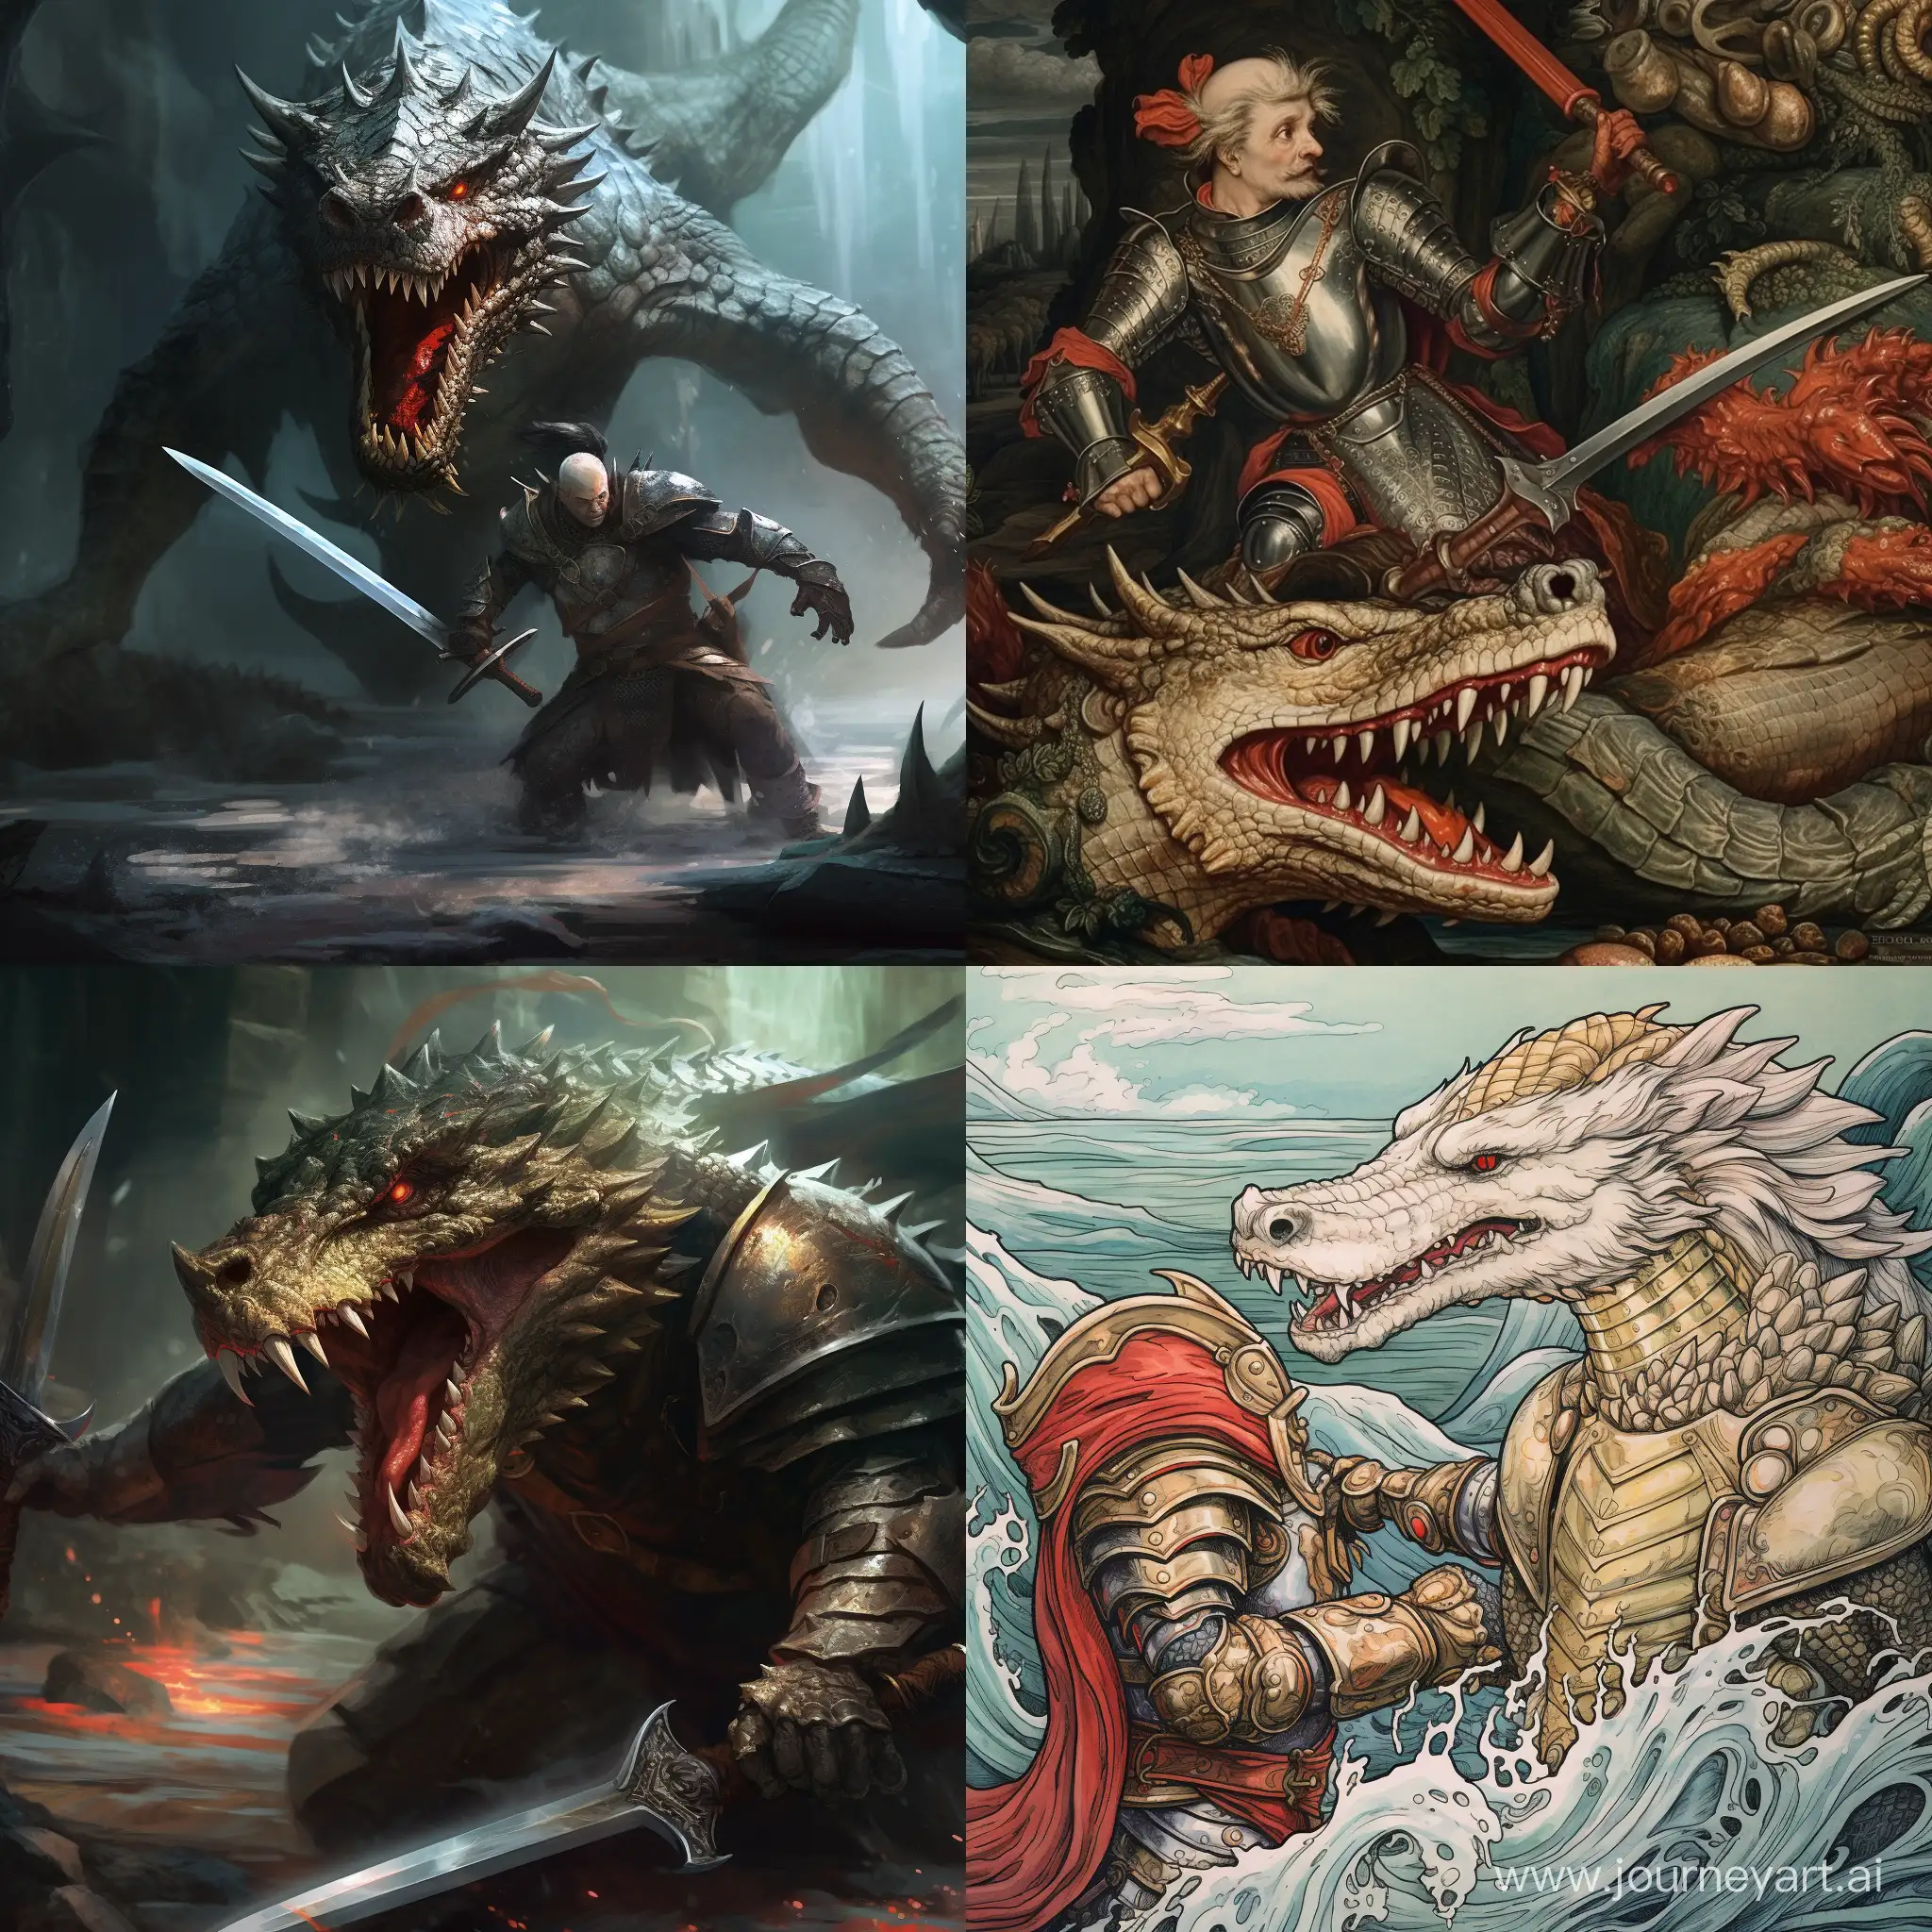 Battle-of-Mythical-Beasts-Armored-Crocodile-Triumphs-Over-Dragon